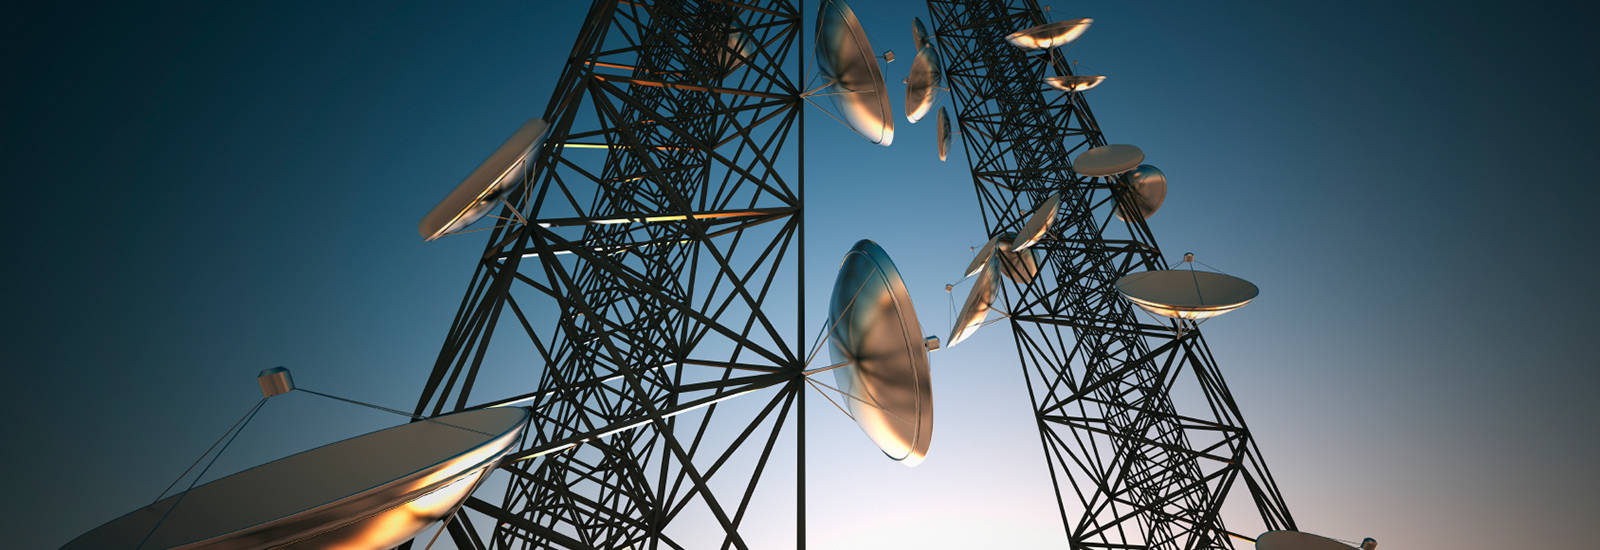 Work - Industries - Telecommunications Services by Solutions4Business